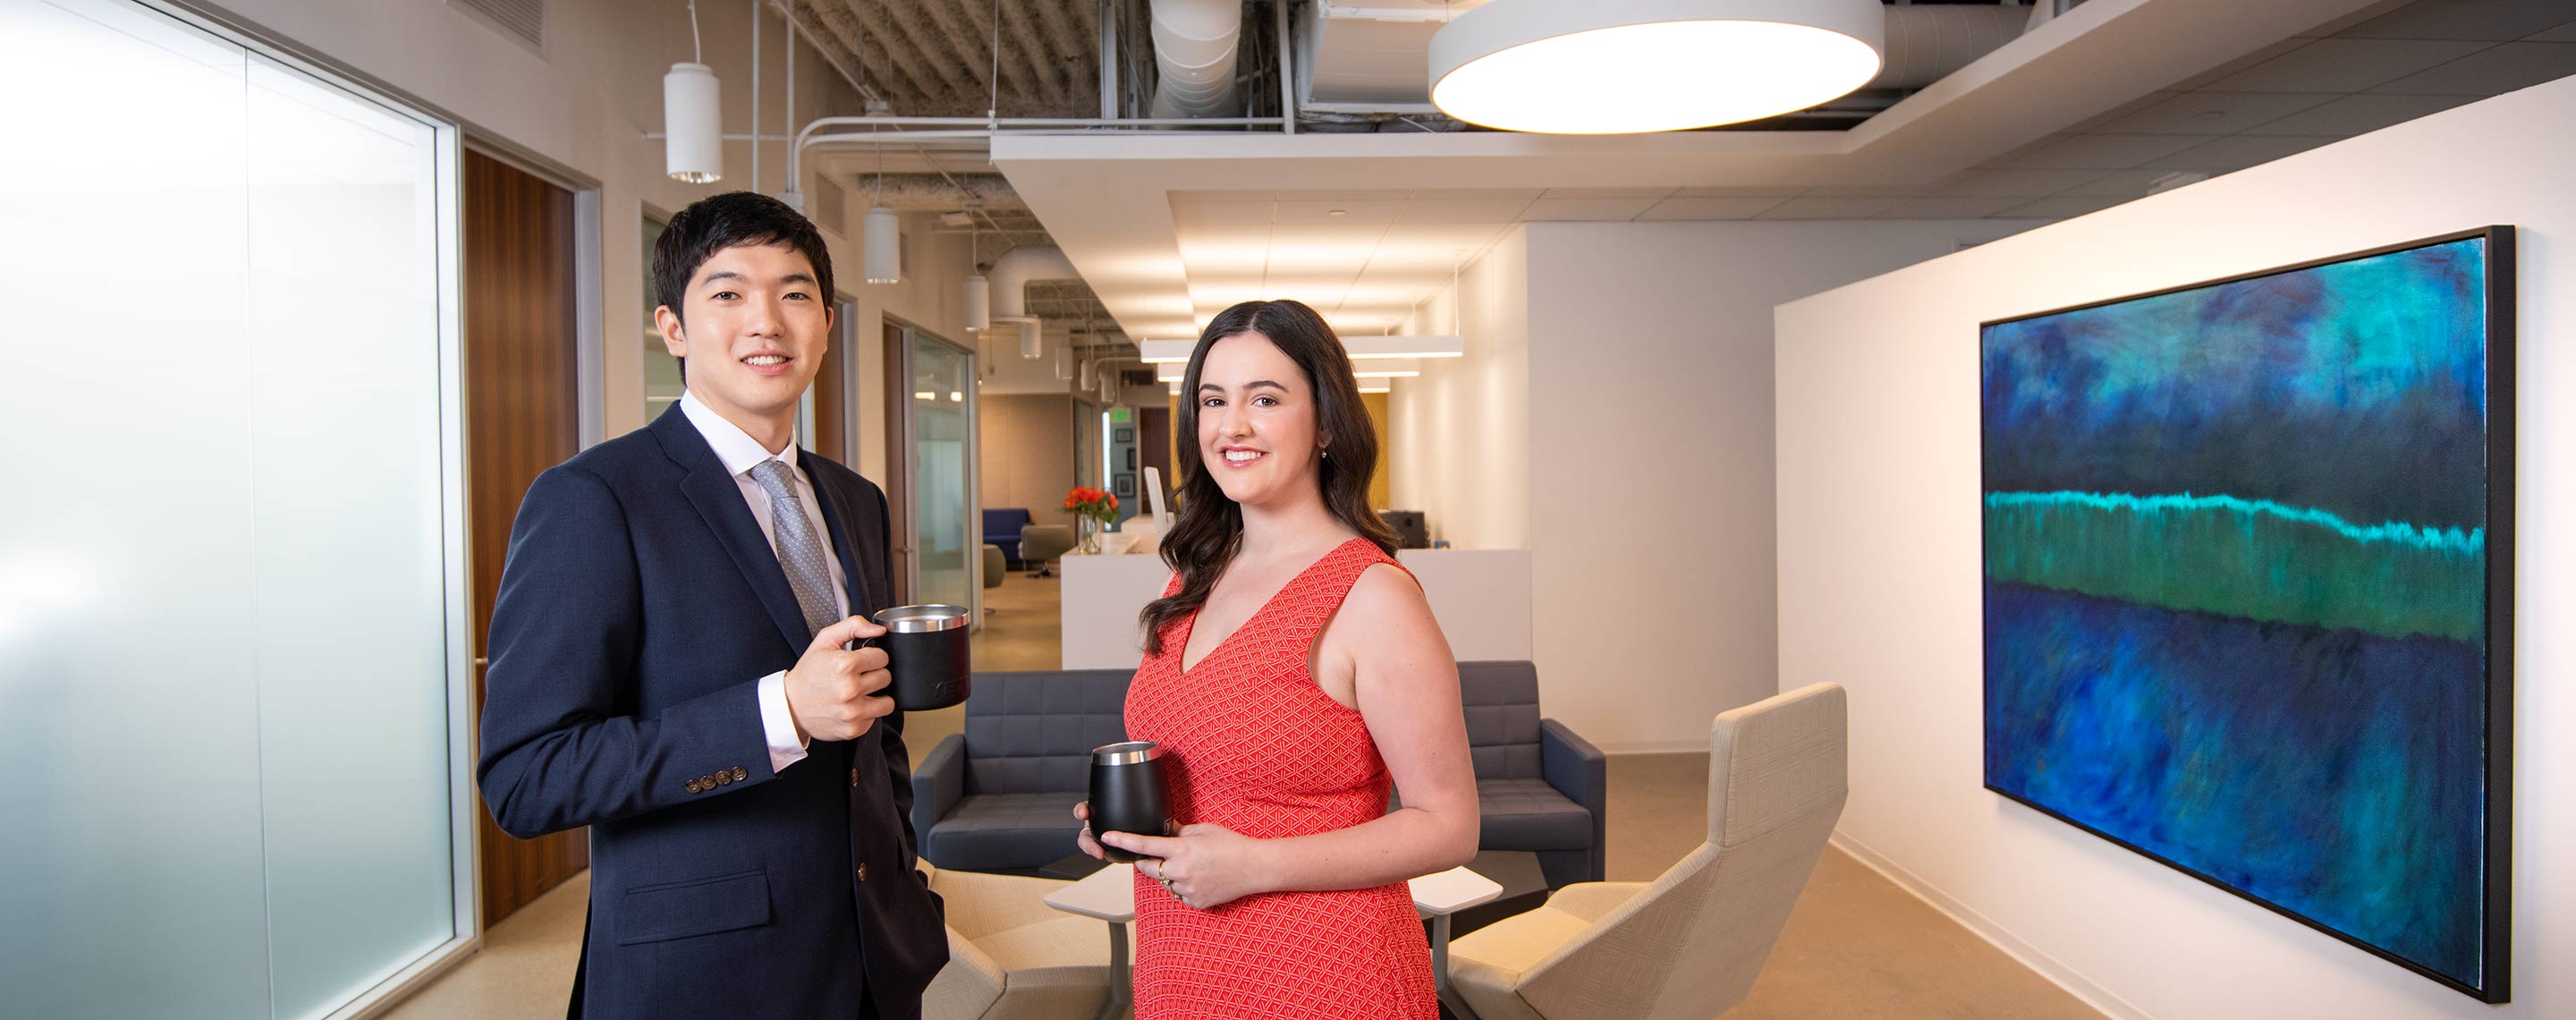 Trial Fellows Image - Picture of two people standing in office drinking coffee